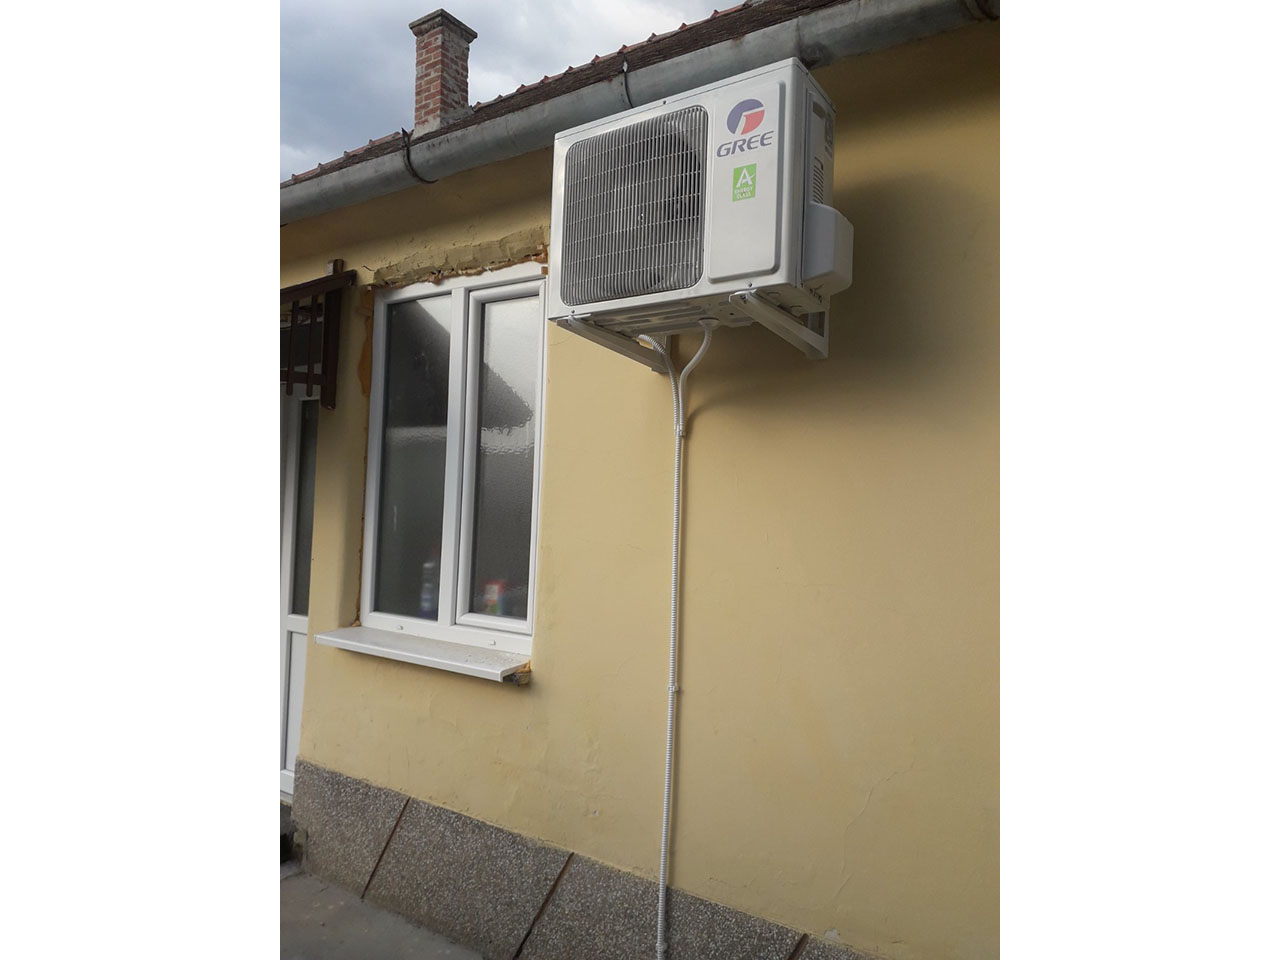 Photo 2 - HOME APPLIANCES AND AIR CONDITIONING SERVICE ATILA 023 - Electrical equipment, service and sales, Zrenjanin